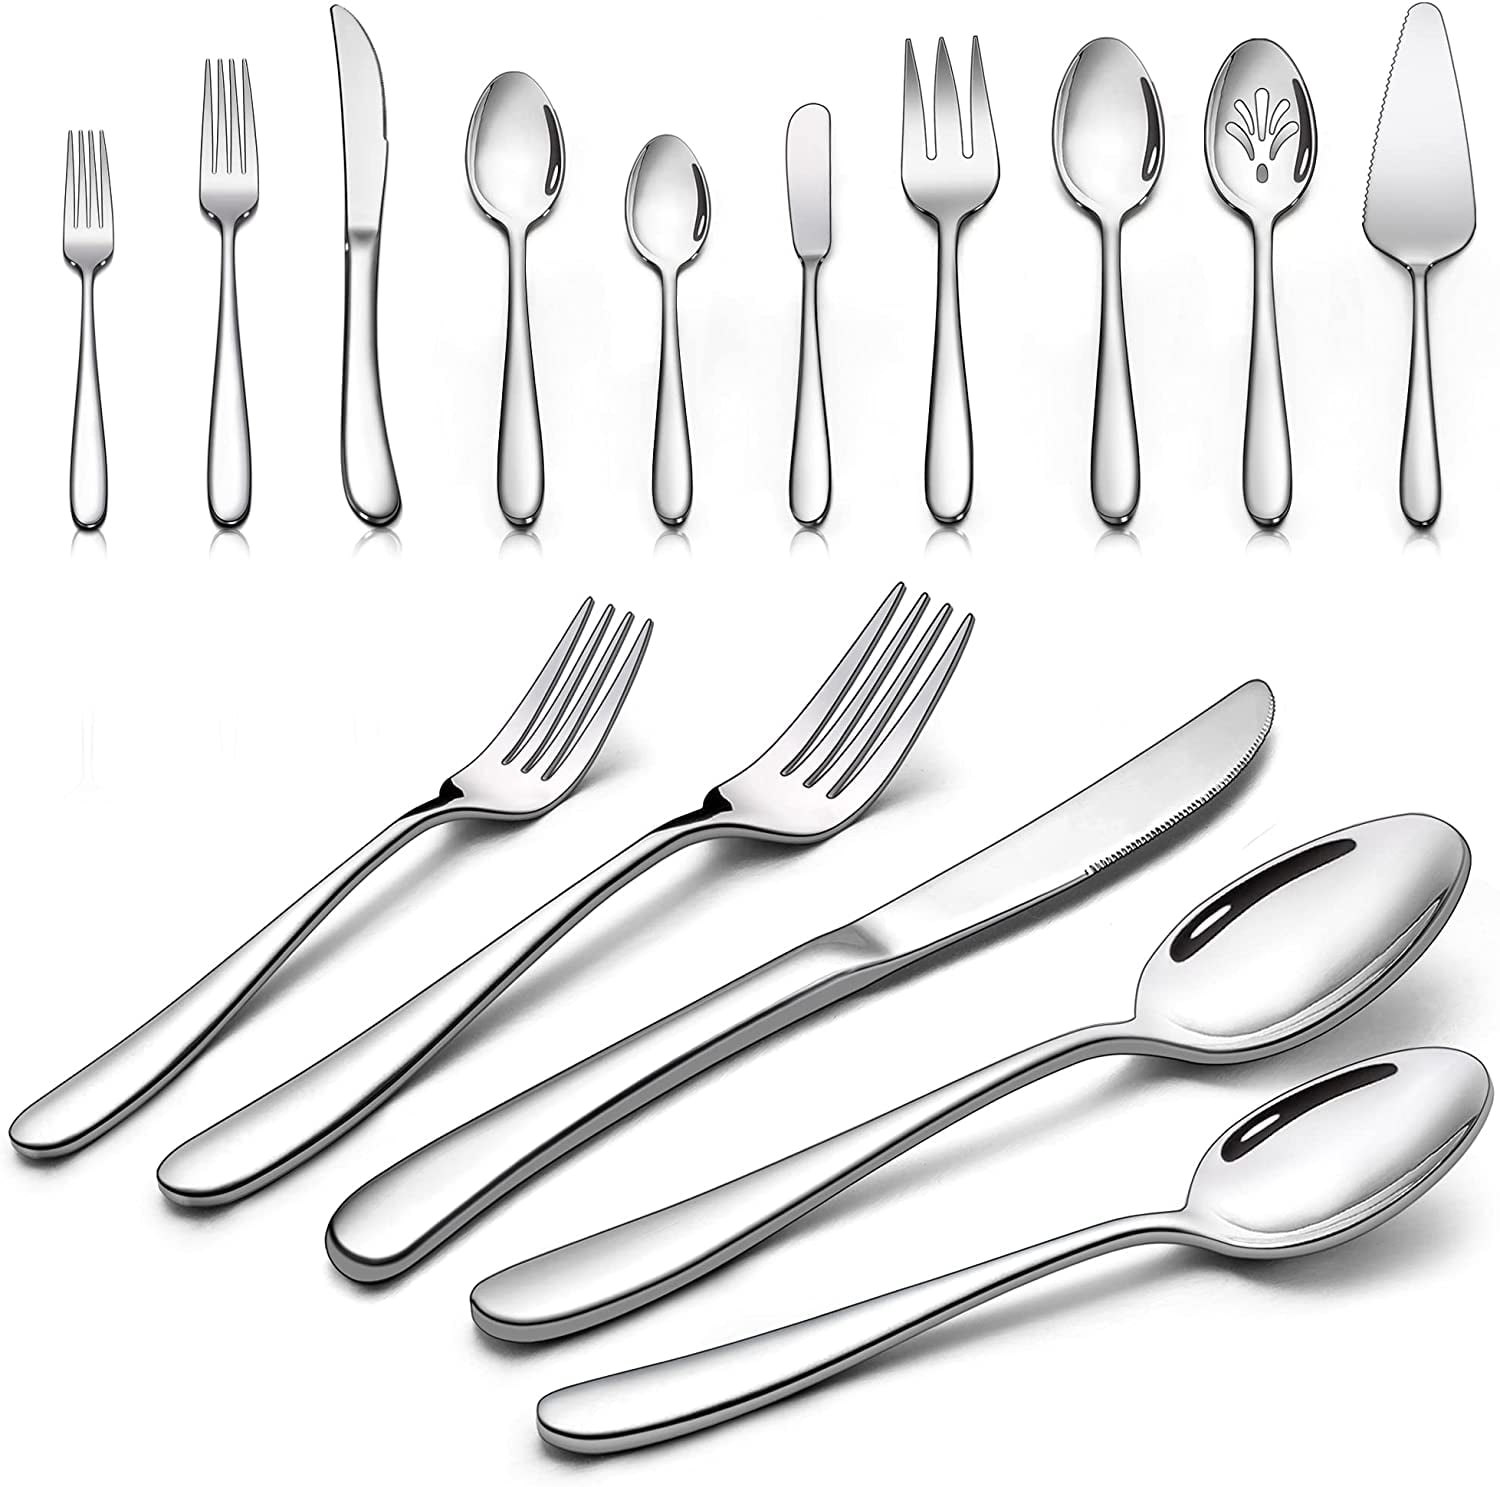 LIANYU 38-Piece Silverware Set with Serving Pieces Stainless Steel Flatware Cutlery Set Mirror Finished Dishwasher Safe Tableware Eating Utensils Service for 6 